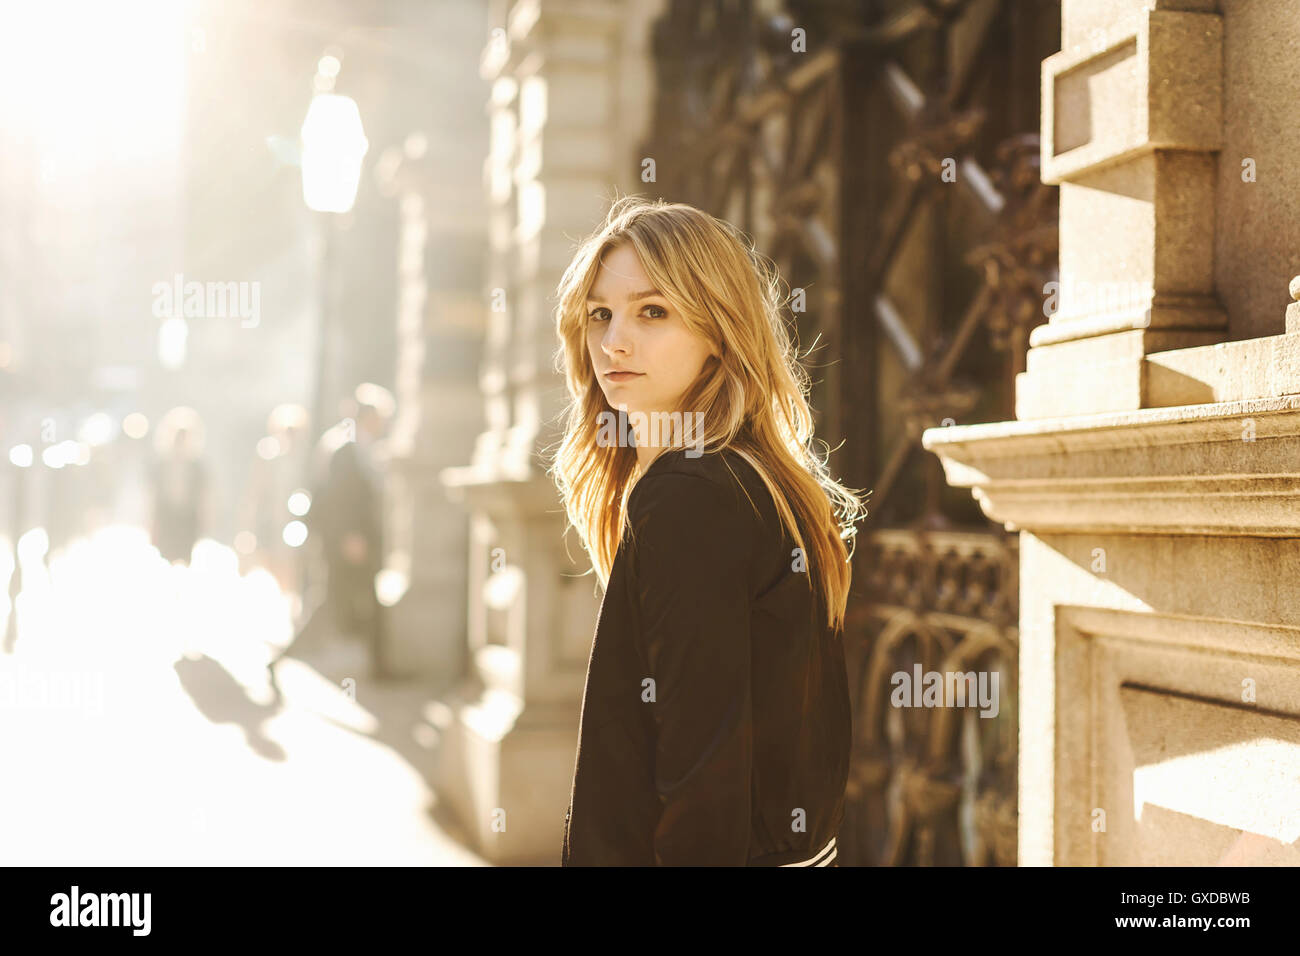 Young woman standing in street, looking over shoulder, pensive expression Stock Photo